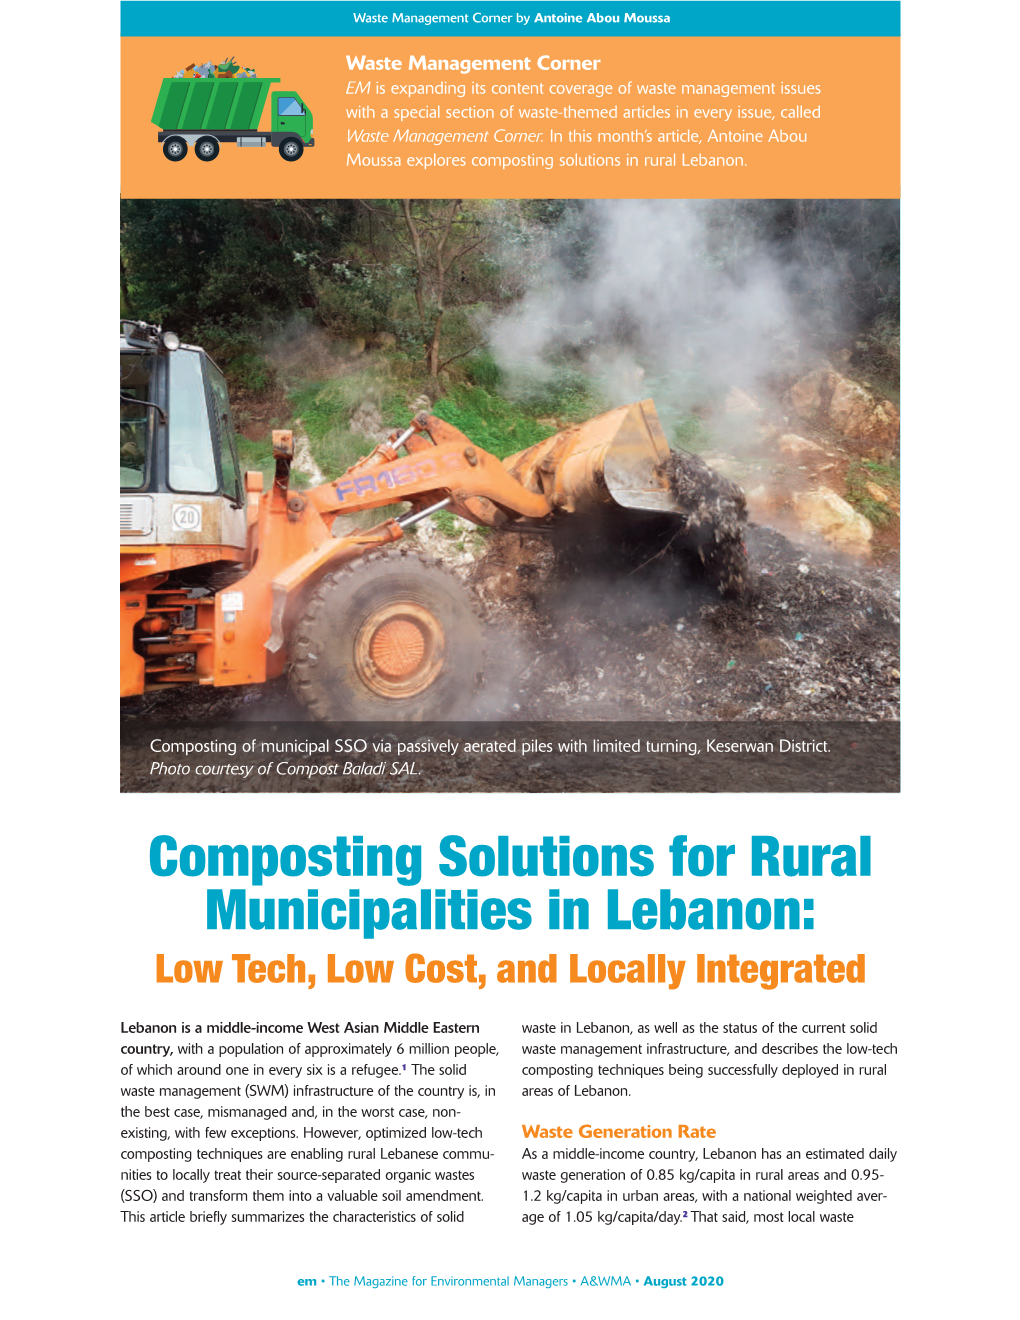 Composting Solutions for Rural Municipalities in Lebanon: Low Tech, Low Cost, and Locally Integrated